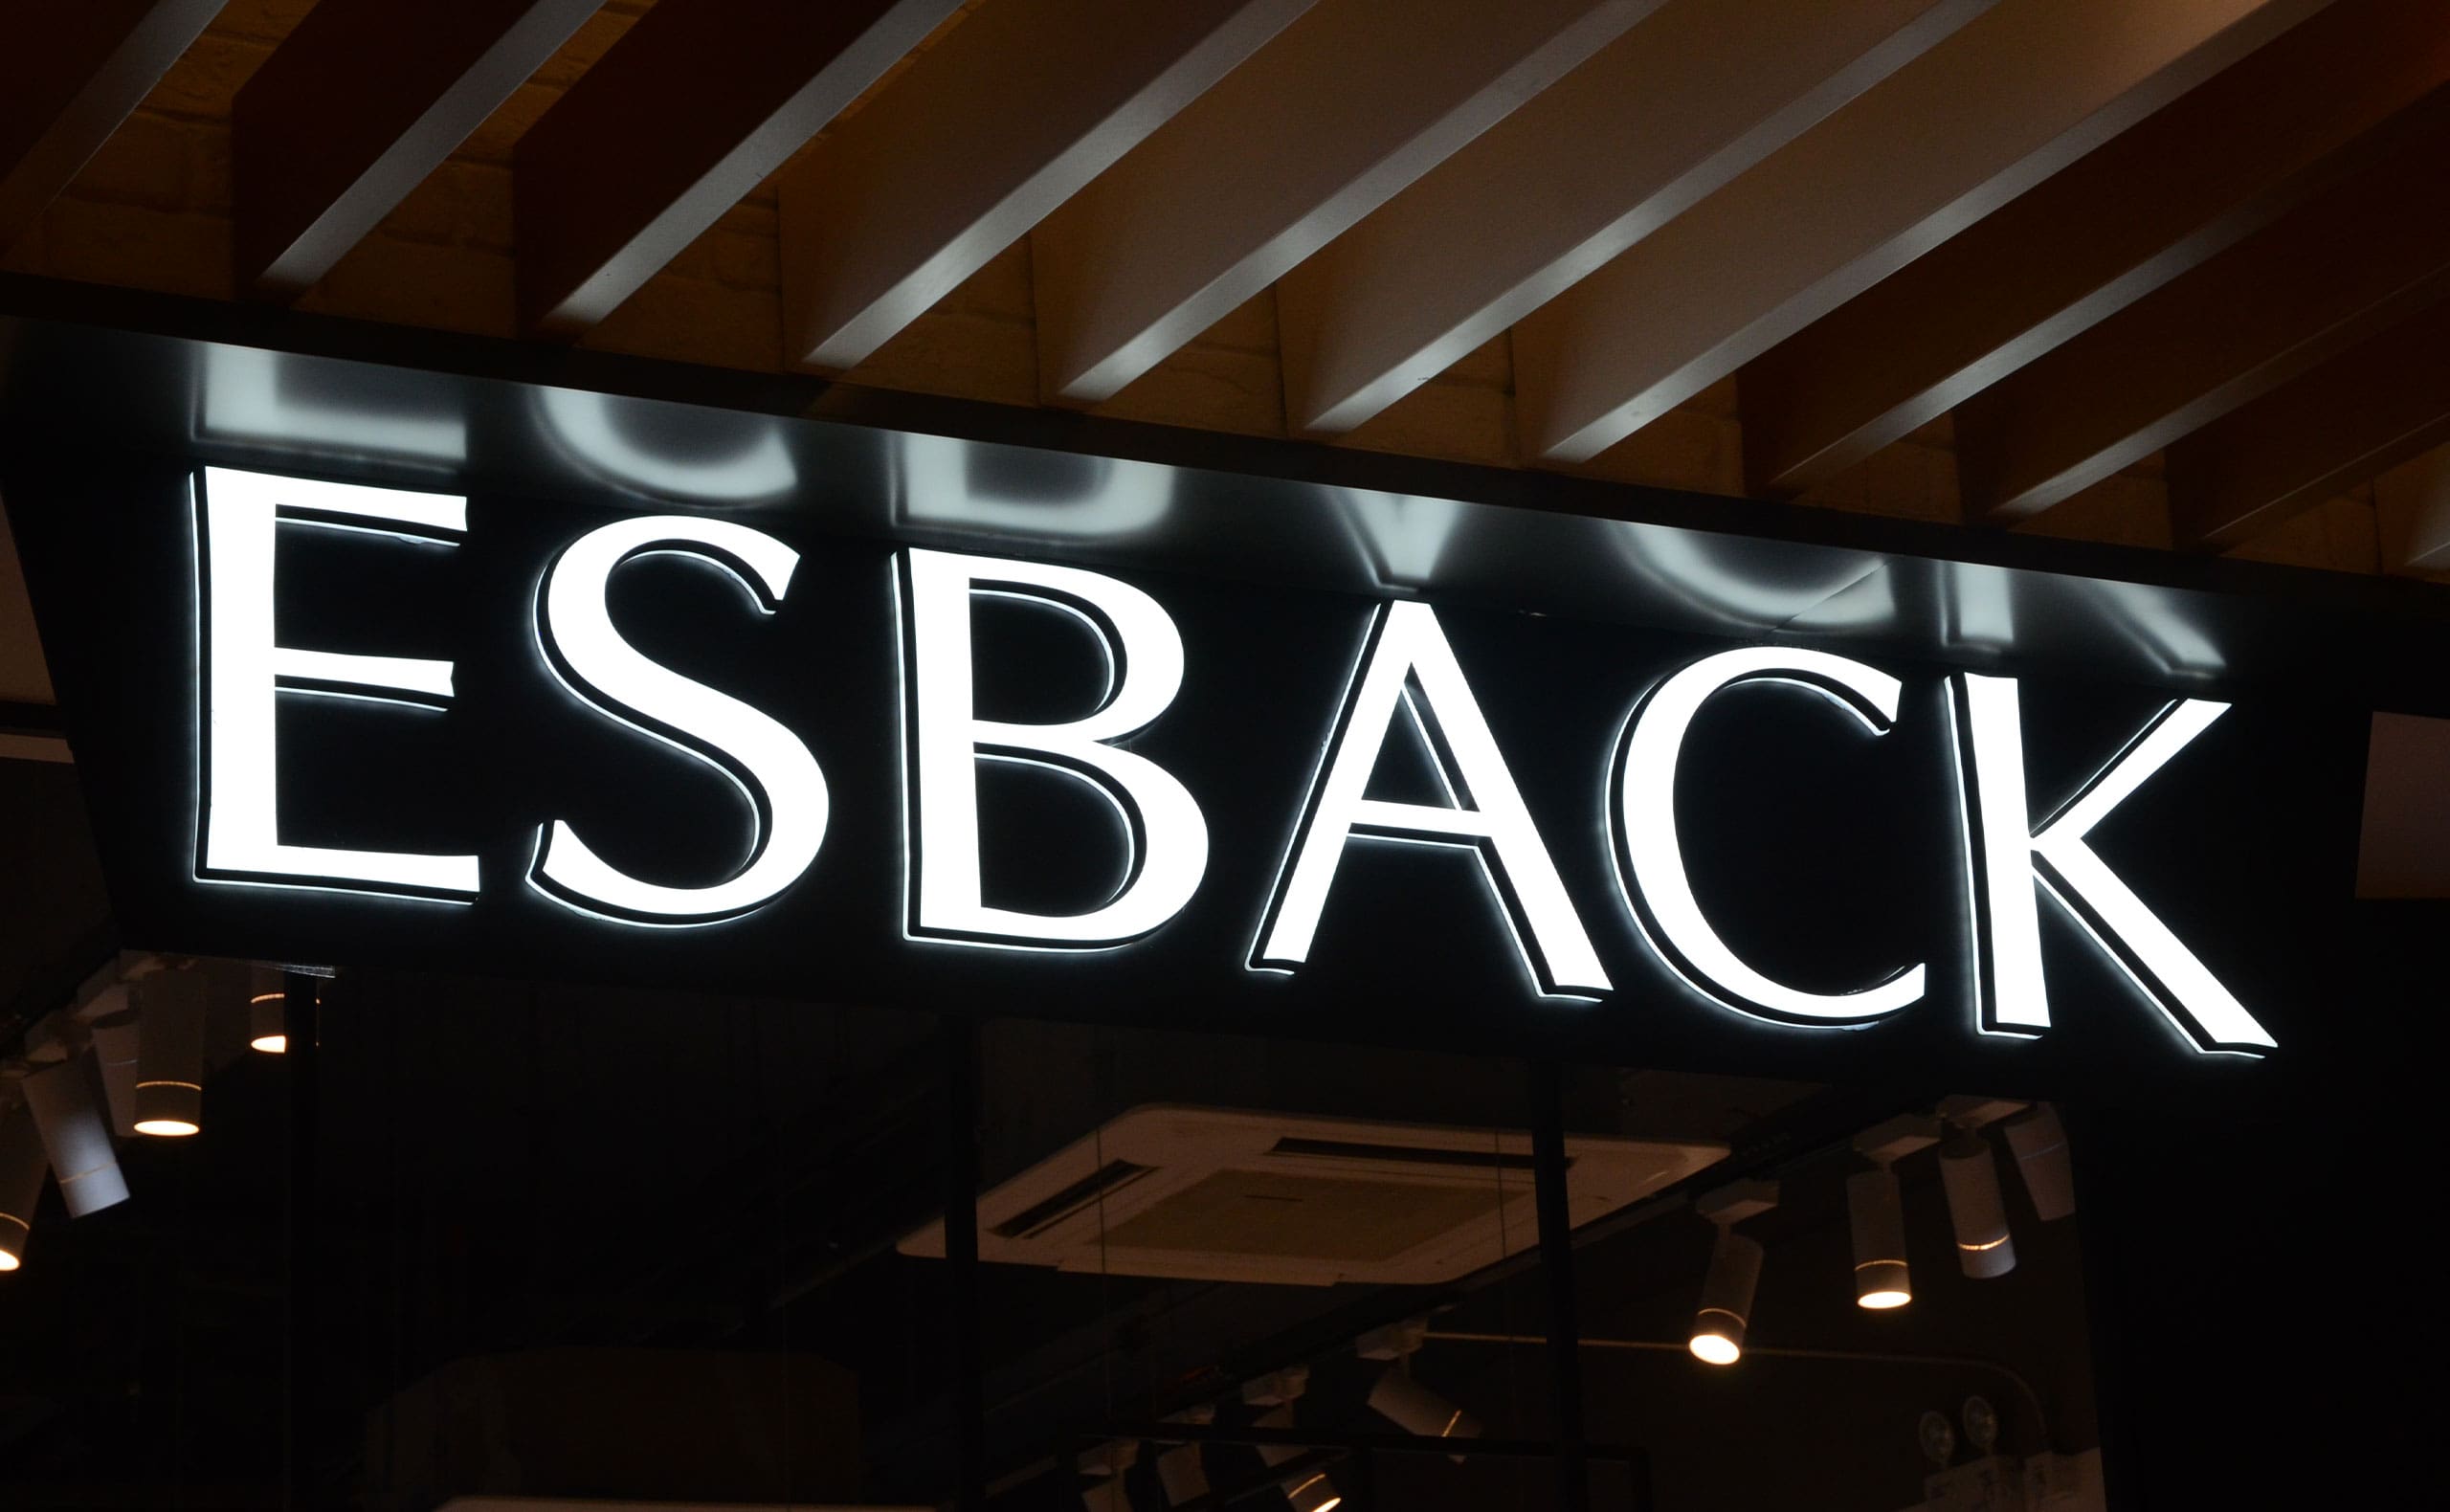 Acrylic Front And Backlit Channel Letters For Esback